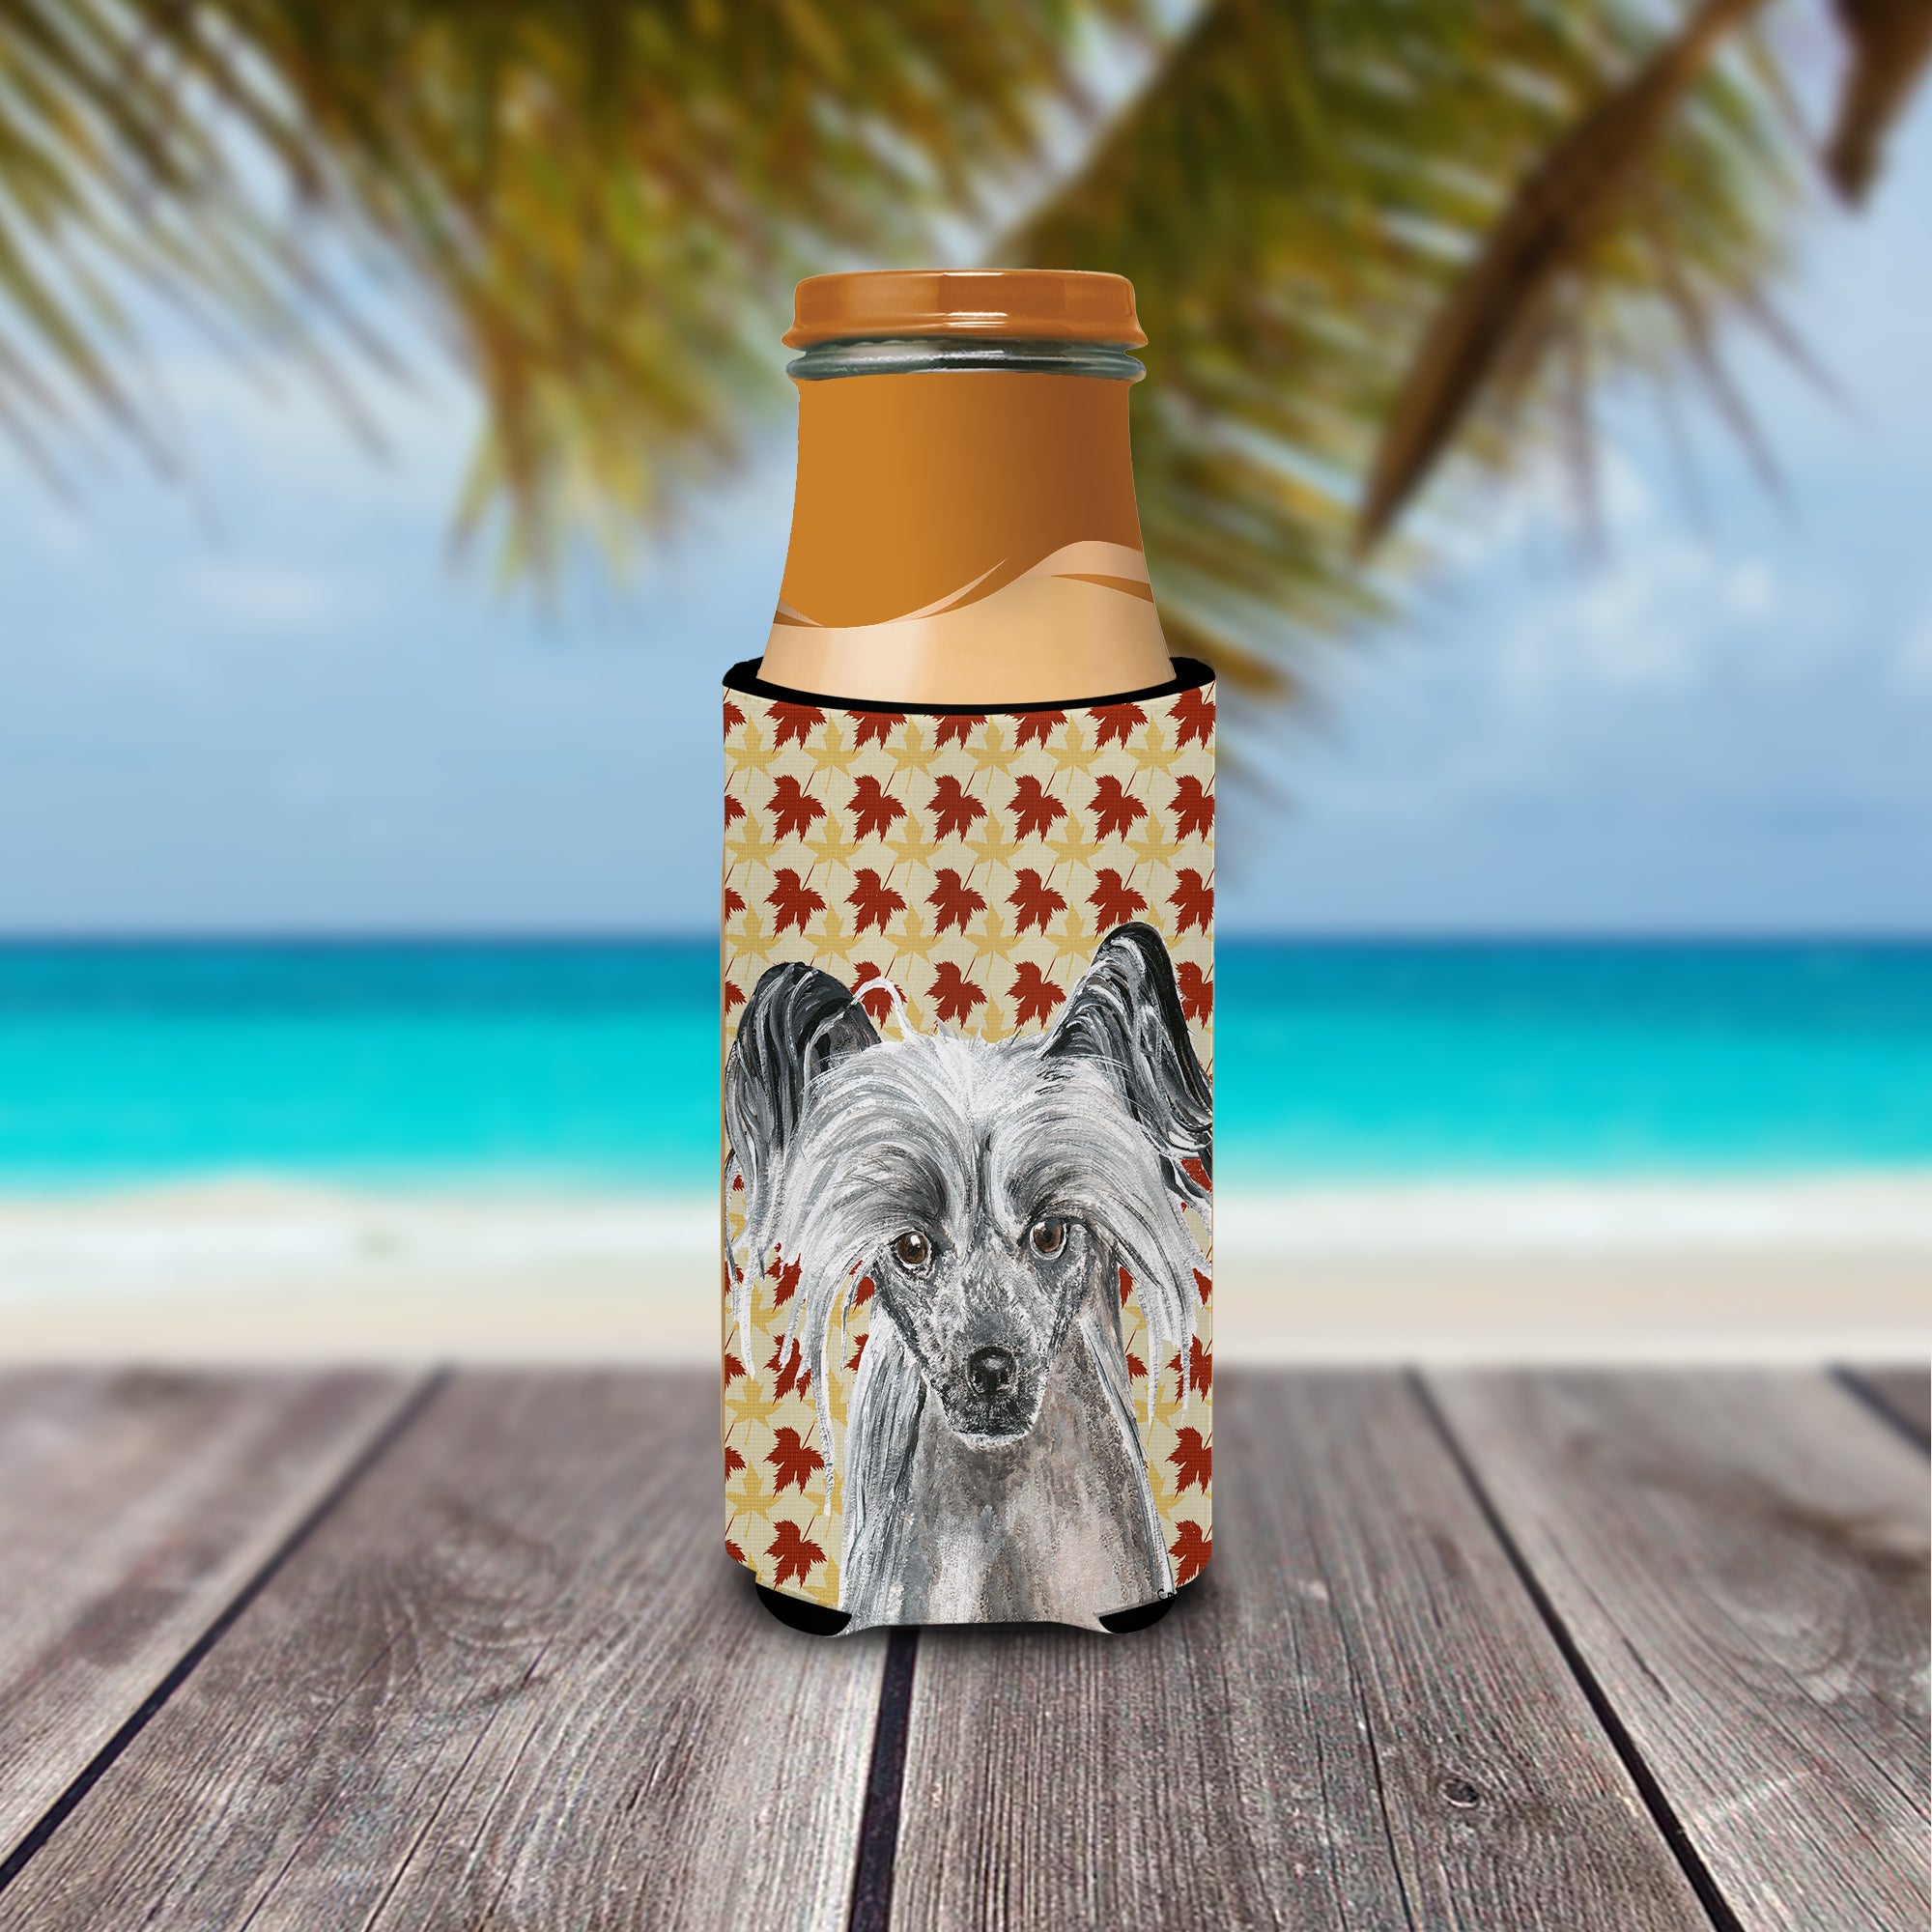 Chinese Crested Fall Leaves Ultra Beverage Insulators for slim cans.